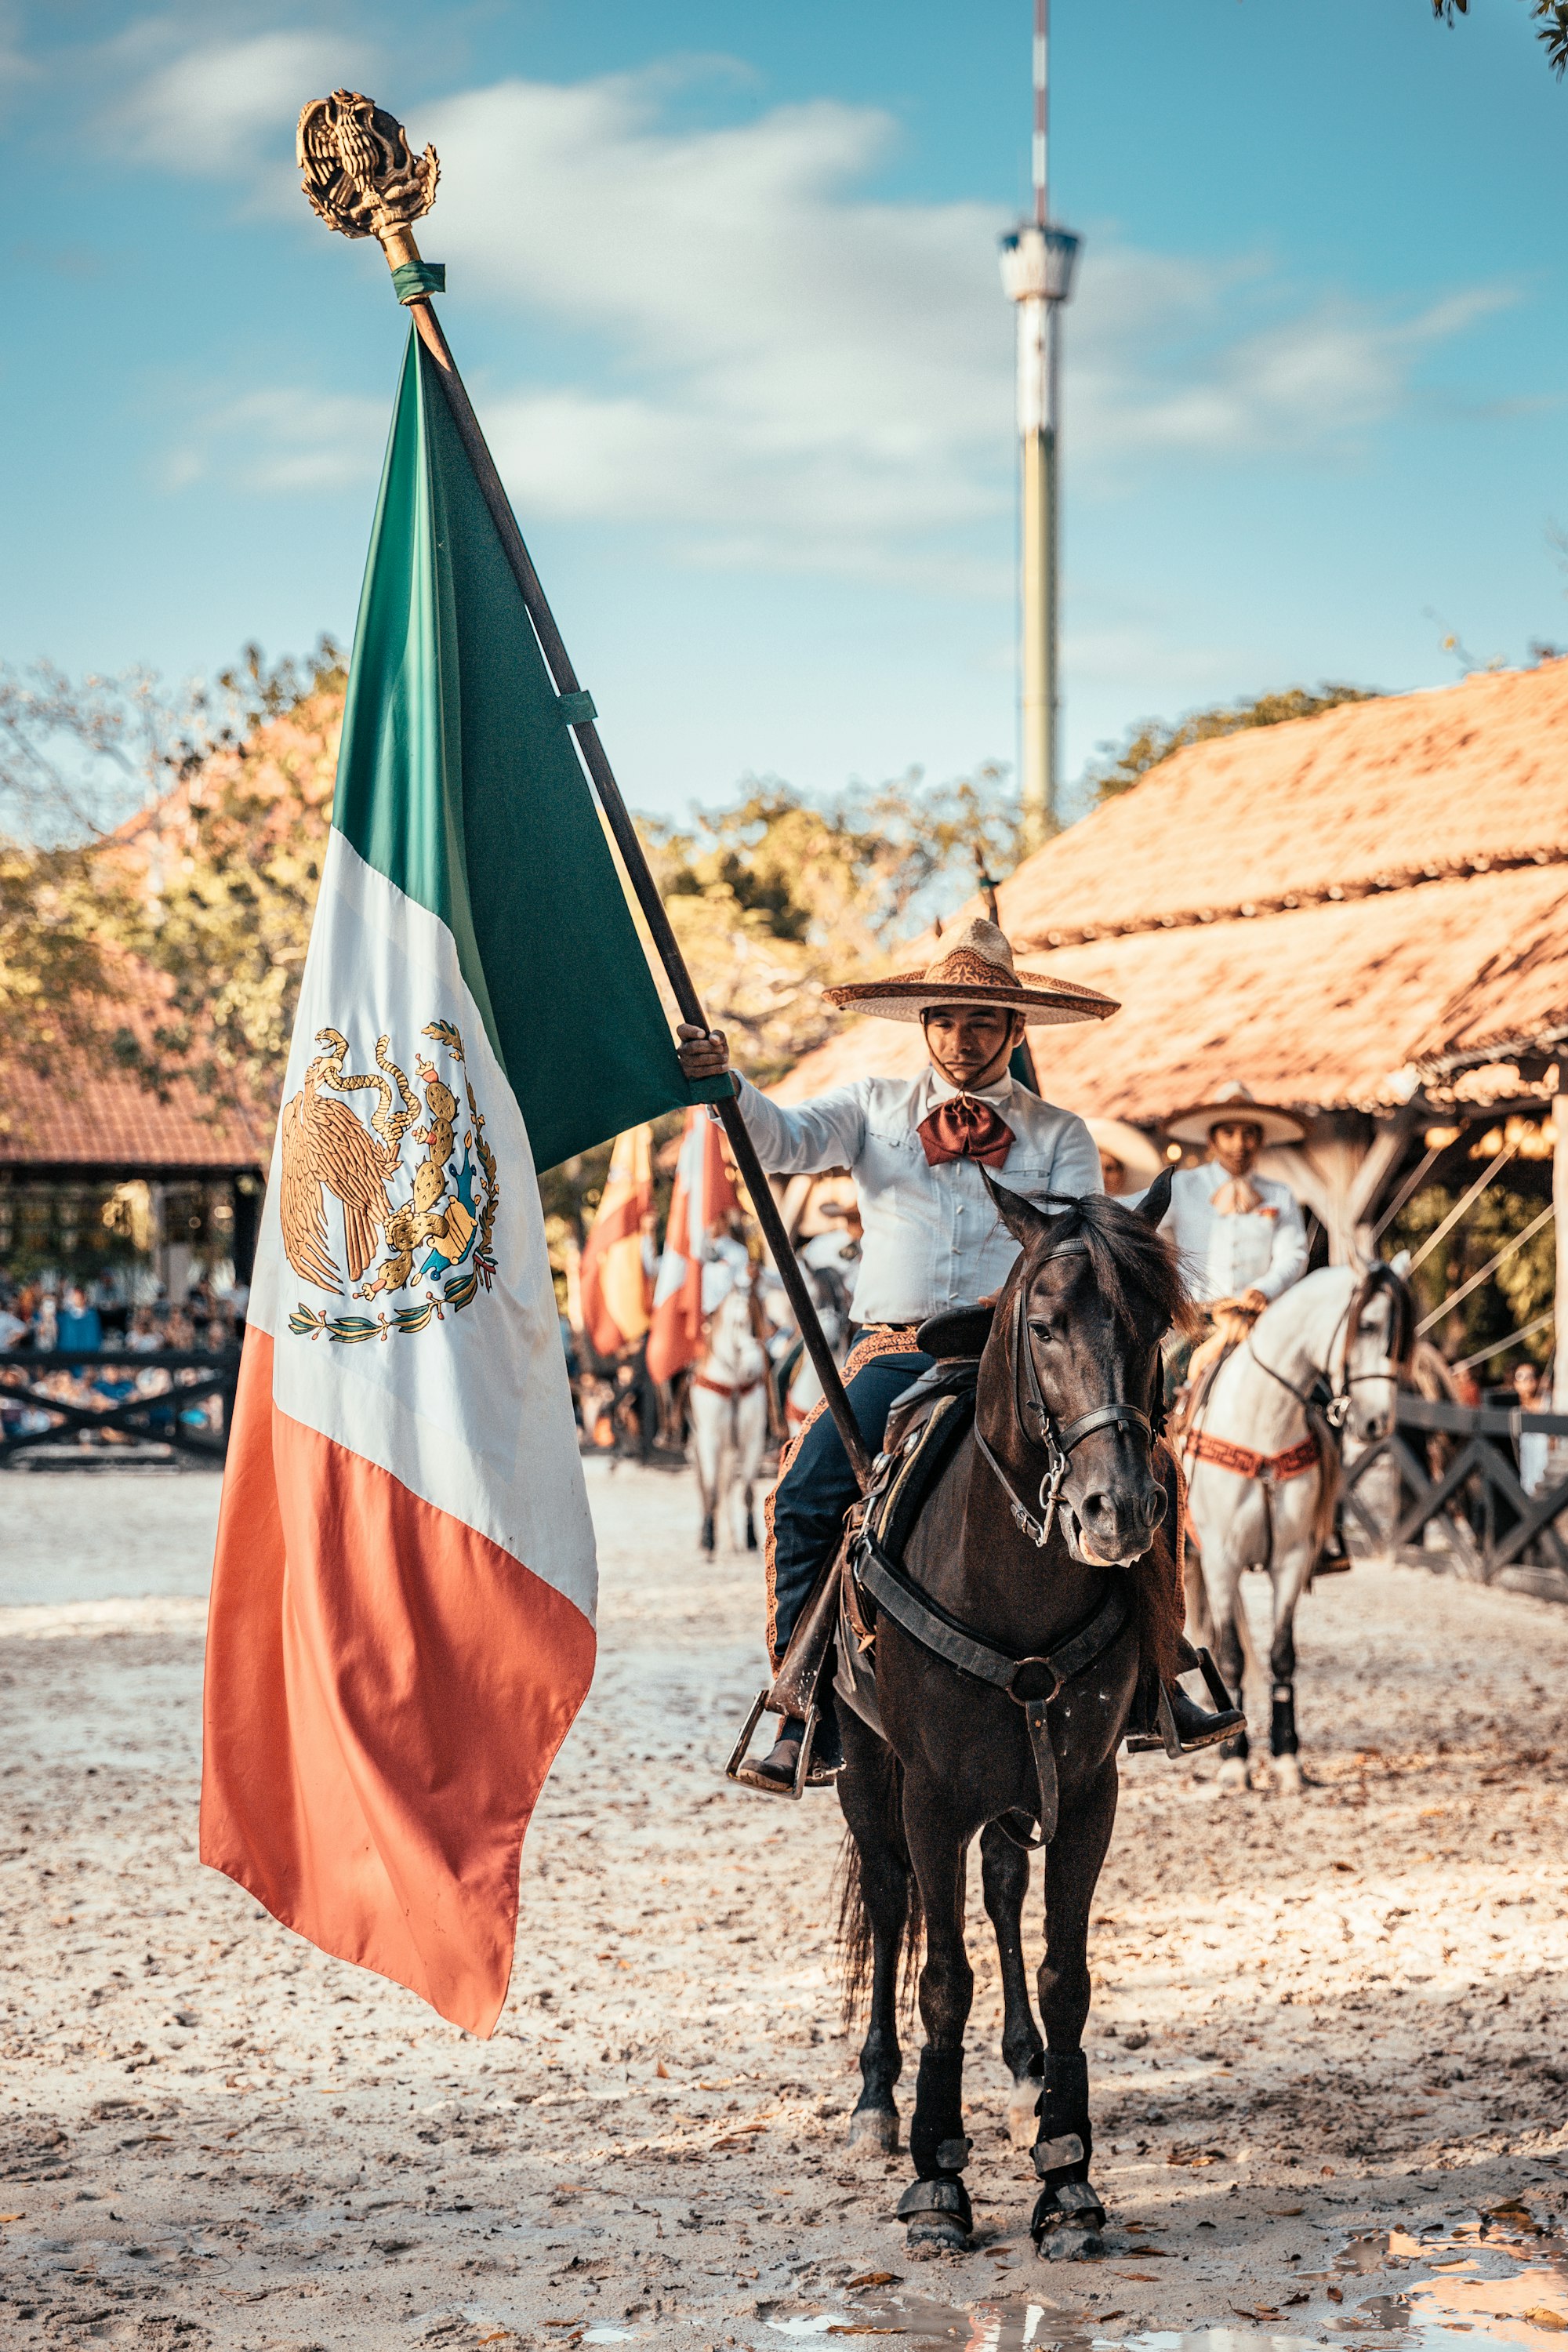 What are the most important traditions in Guadalajara?